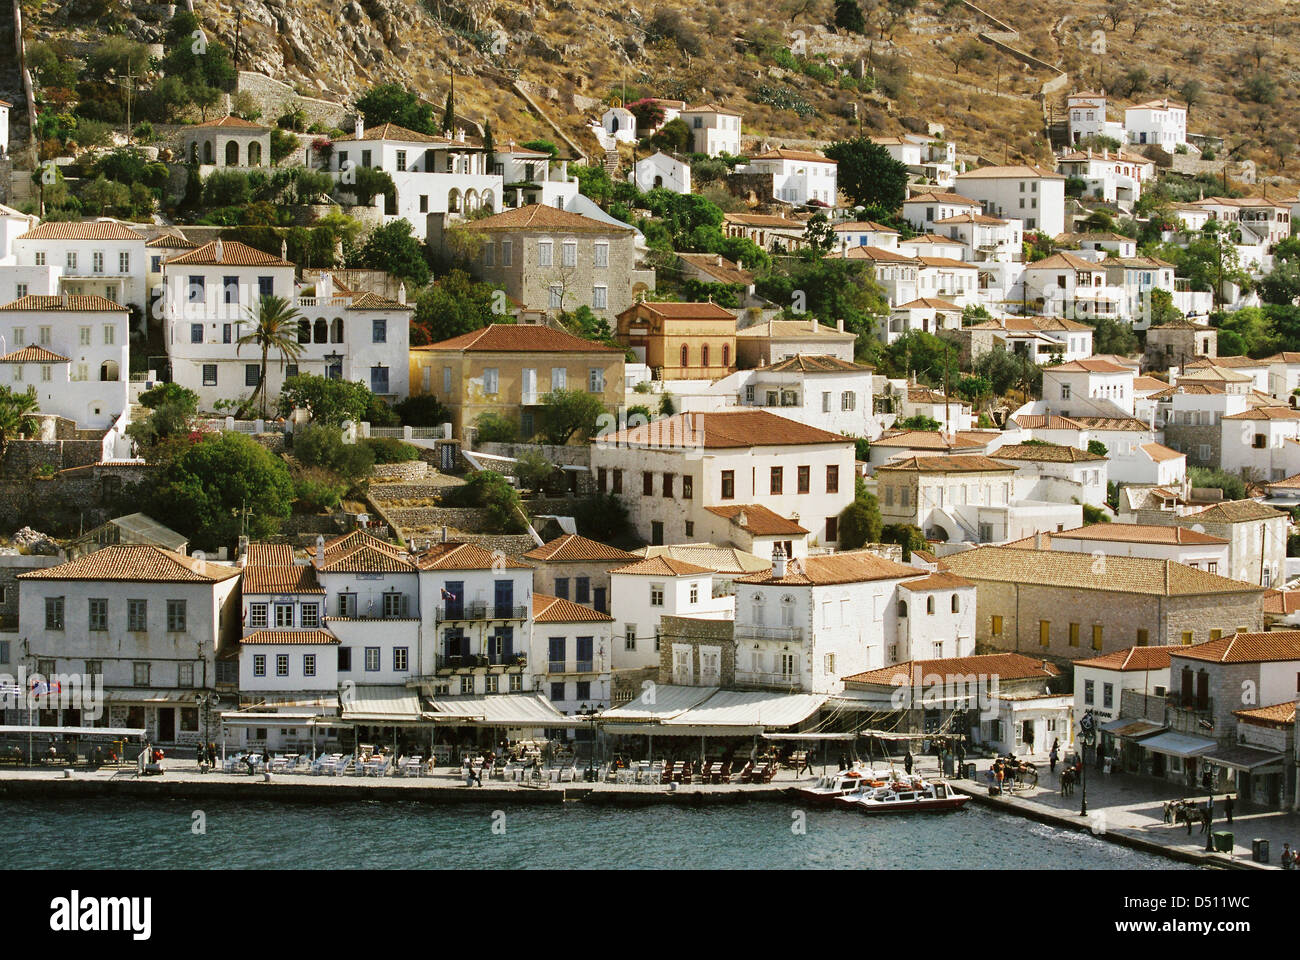 A high angle view of part of Hydra town on the mountainous island of the same name, in the Aegean sea. Stock Photo